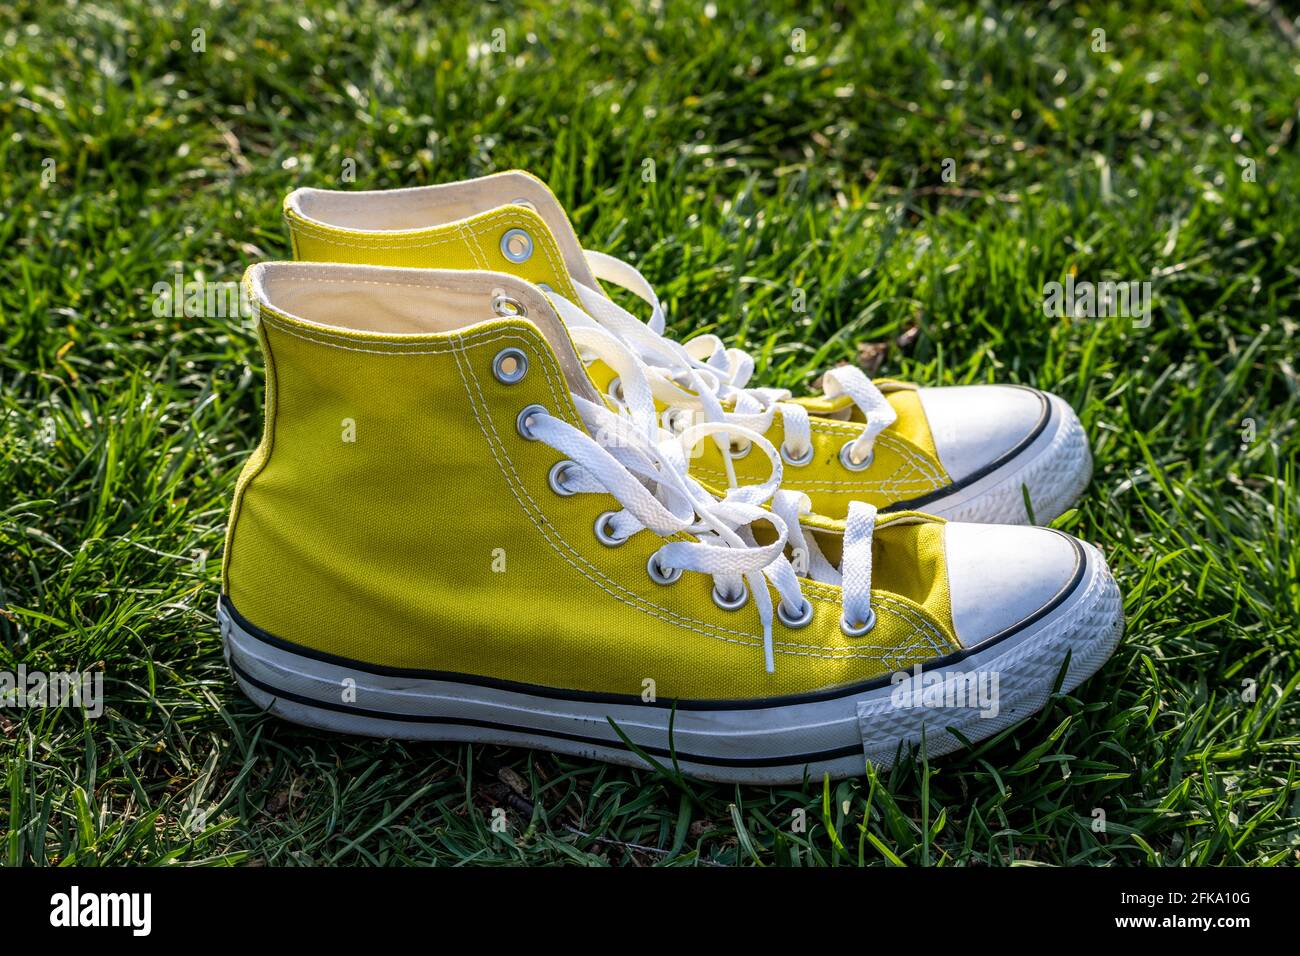 converse all star hi trainers navy yellow festival> Latest trends > OFF-54%